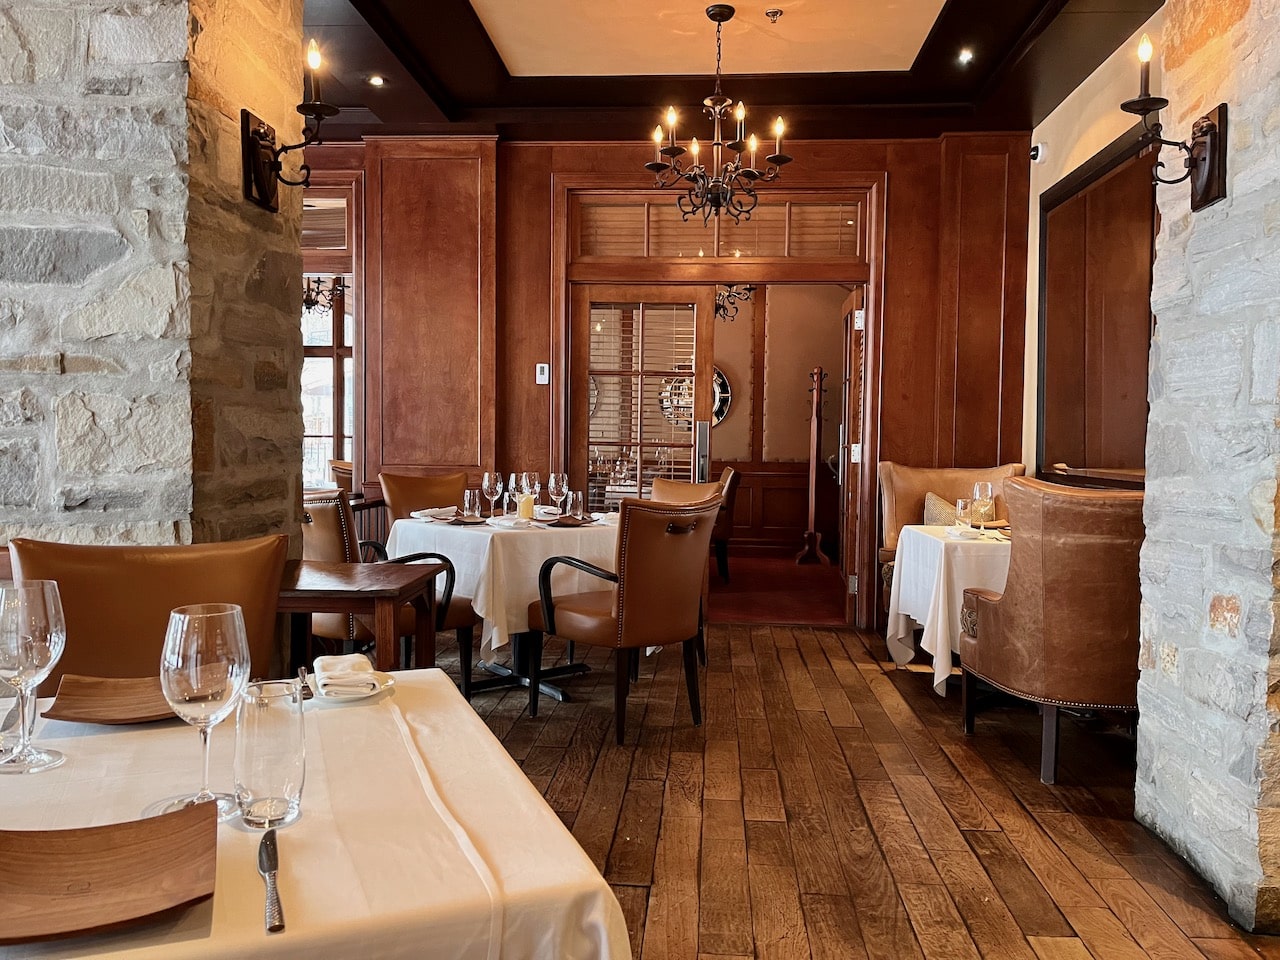 Restaurant La Quintessence serves French and Mediterranean cuisine with a Quebecois touch.